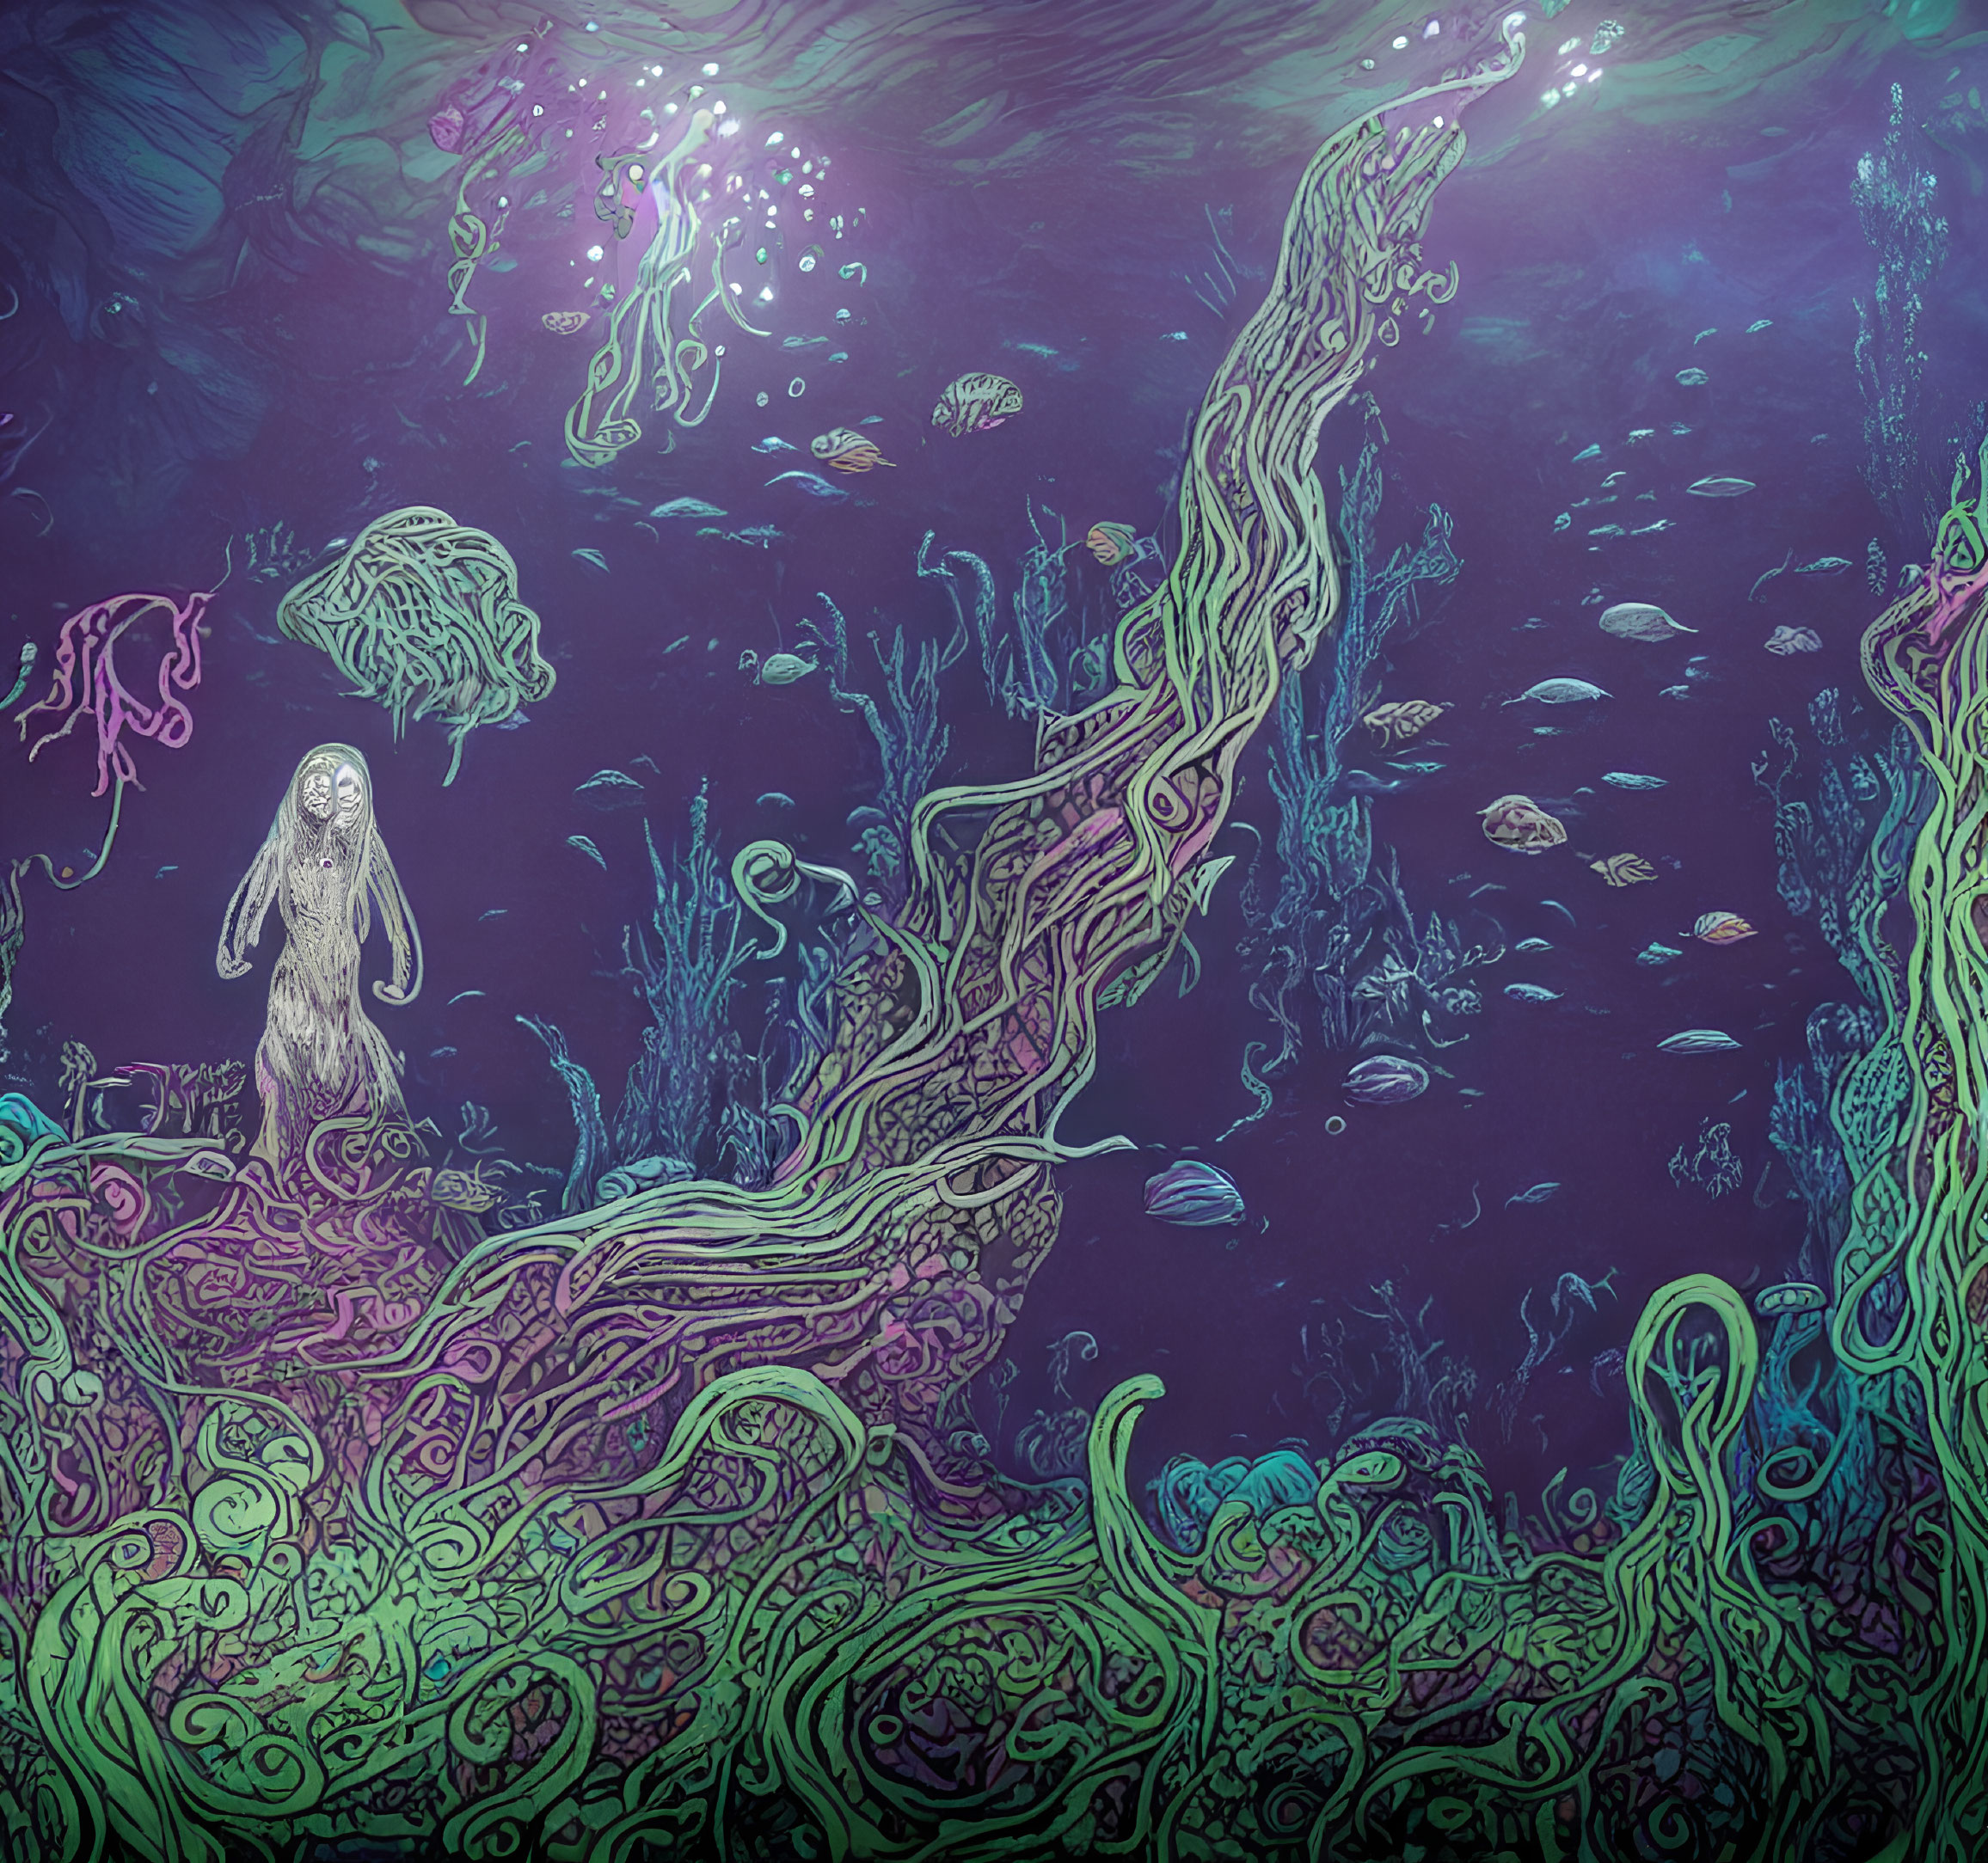 Vibrant underwater scene with jellyfish, fish, and spectral figure on coral.